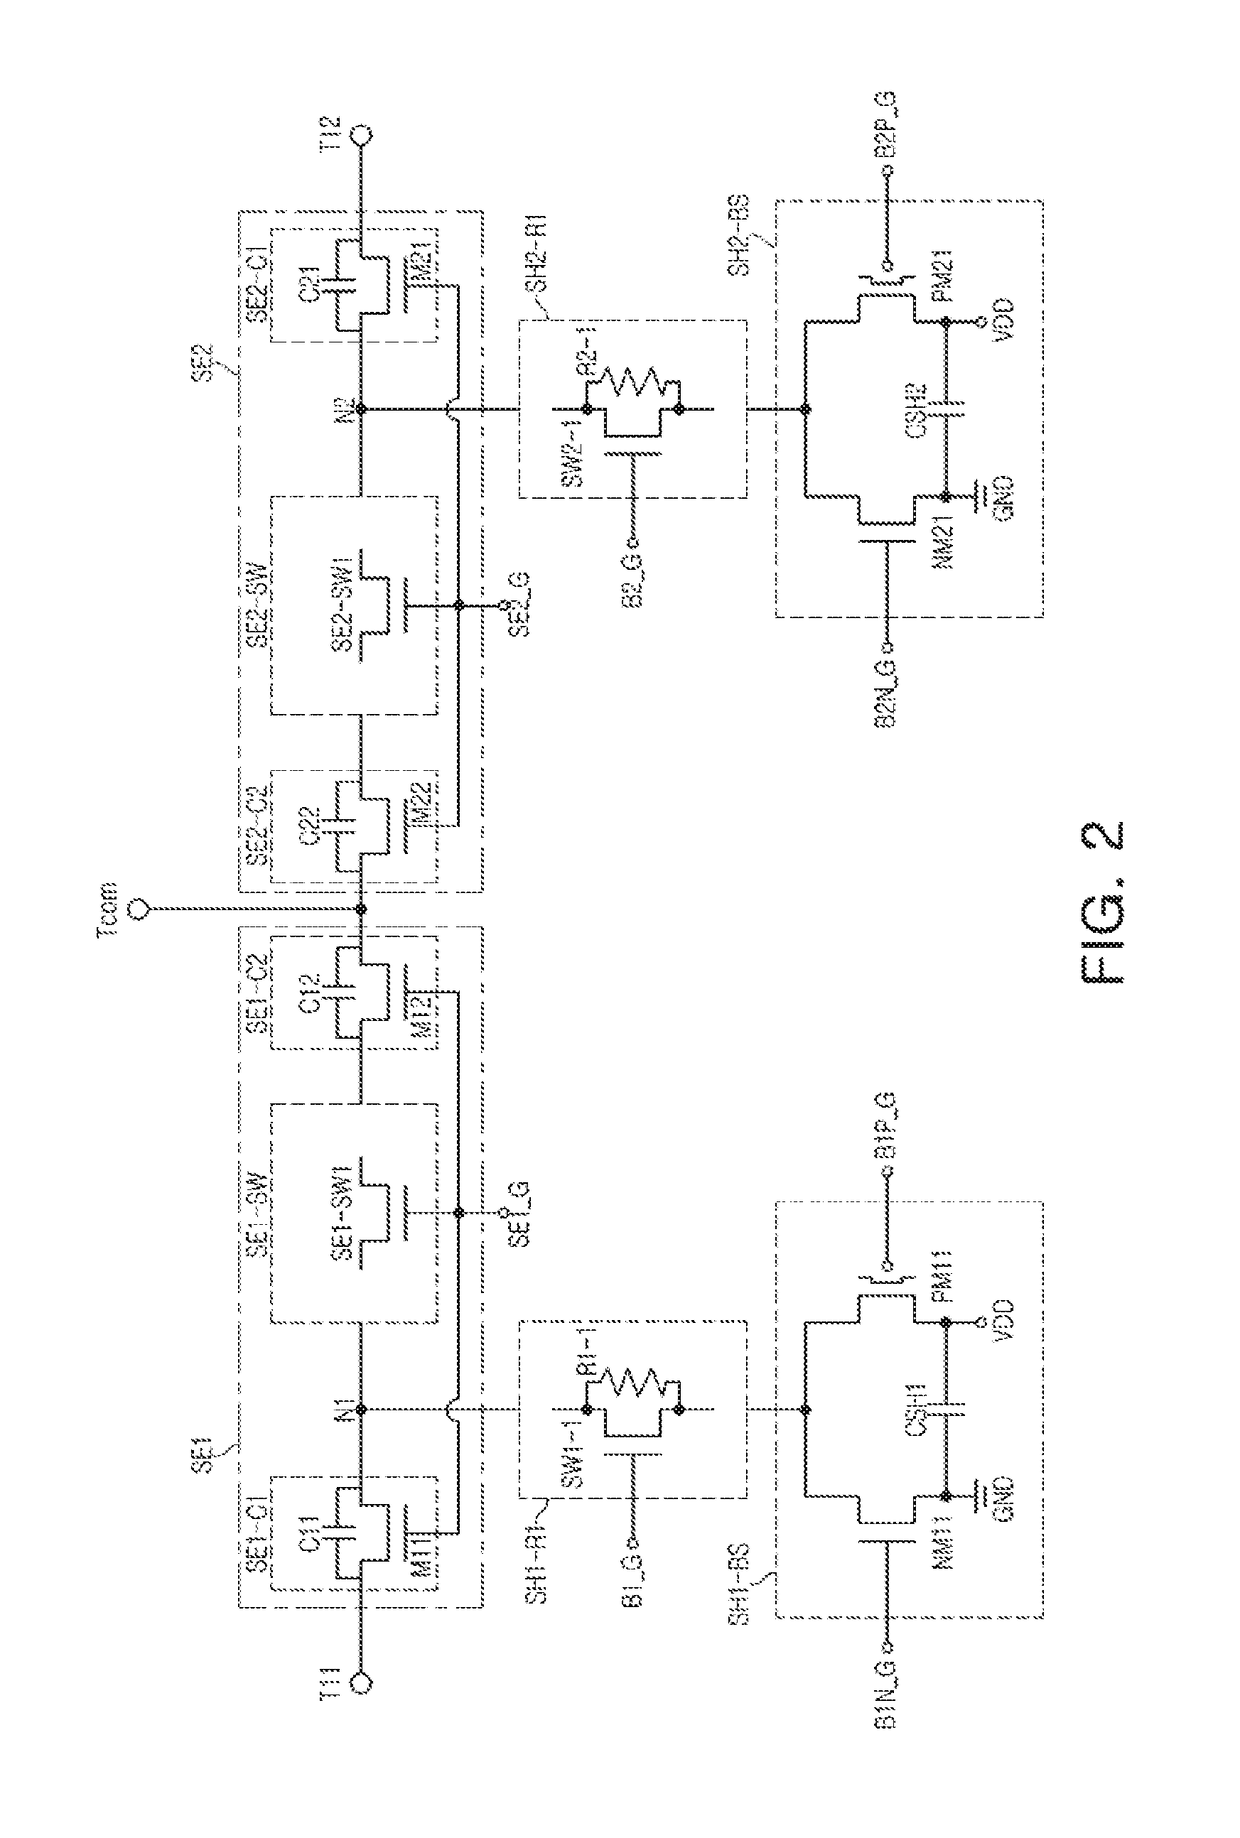 Radio frequency switch apparatus with integrated shunt and bias